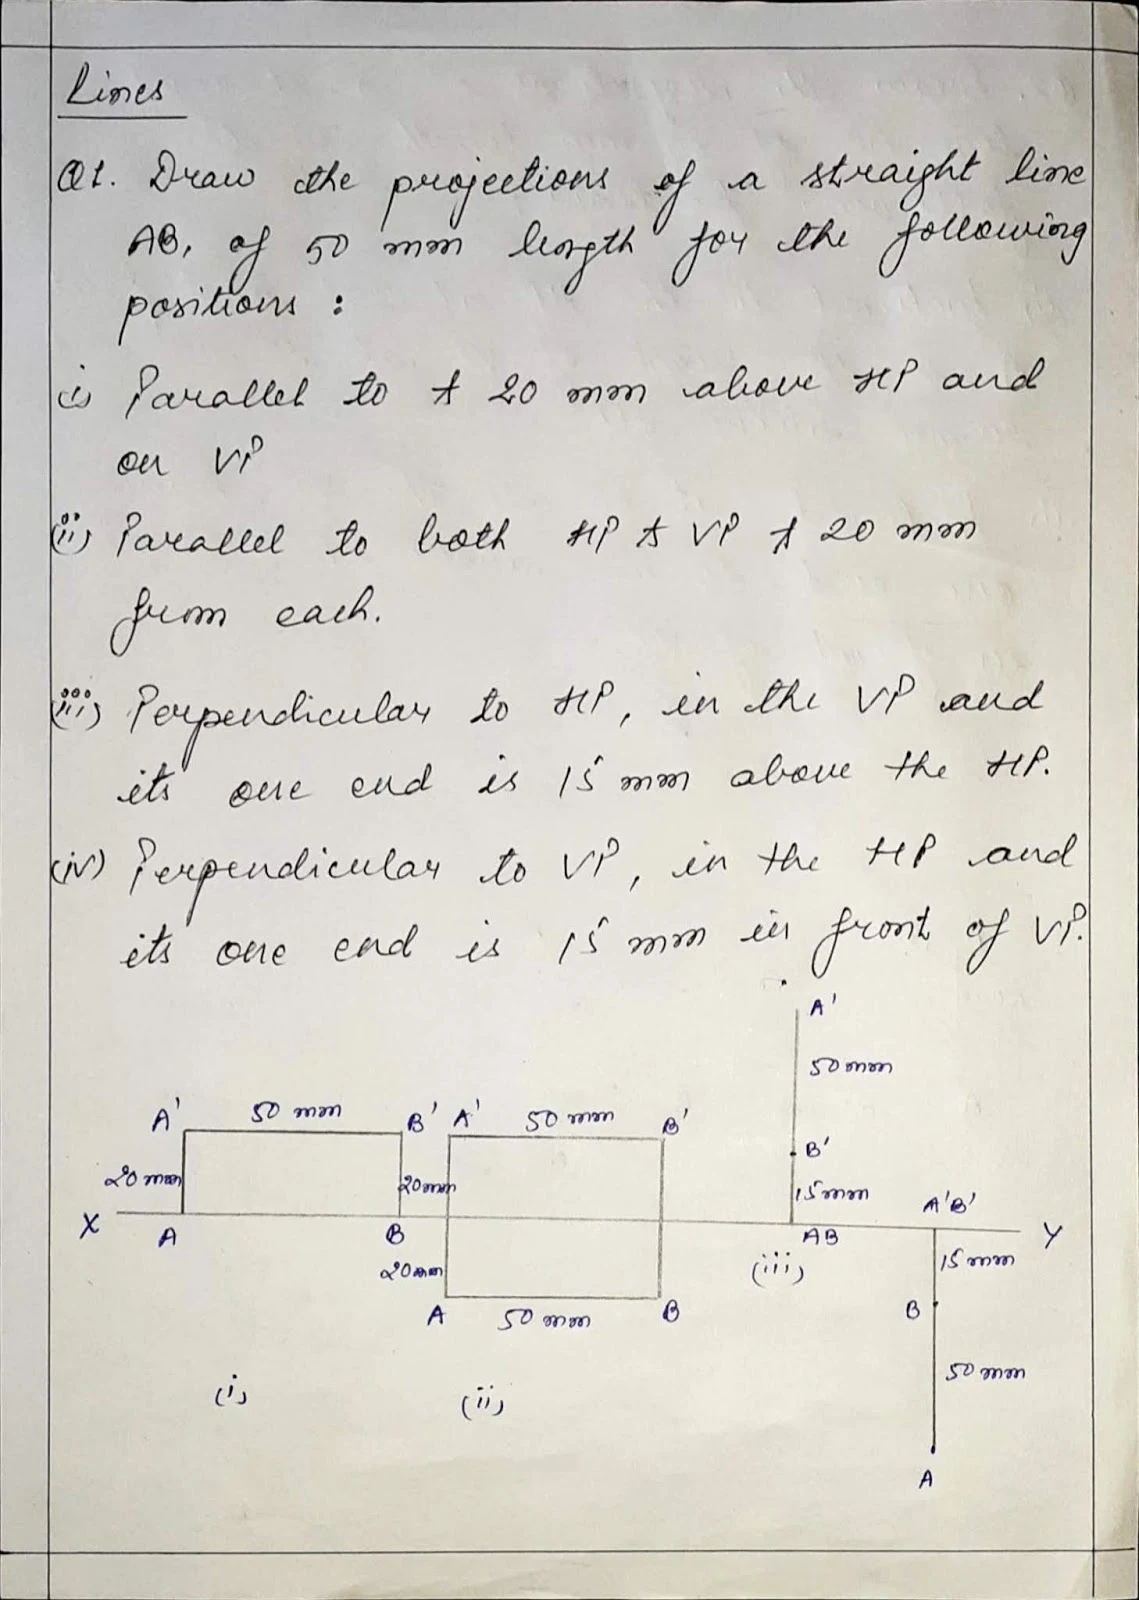 Q.1 Draw the projections of a straight line AB, of 50 mm length for the following positions: (i) Parallel to & 20 mm above HP & on VP. (ii) Parallel to both HP & VP & 20 mm from each. (iii) Perpendicular to HP, in the VP and its one end is 15 mm above the HP. (iv) Perpendicular to VP, in the HP and its one end is15 mm in front of the VP.